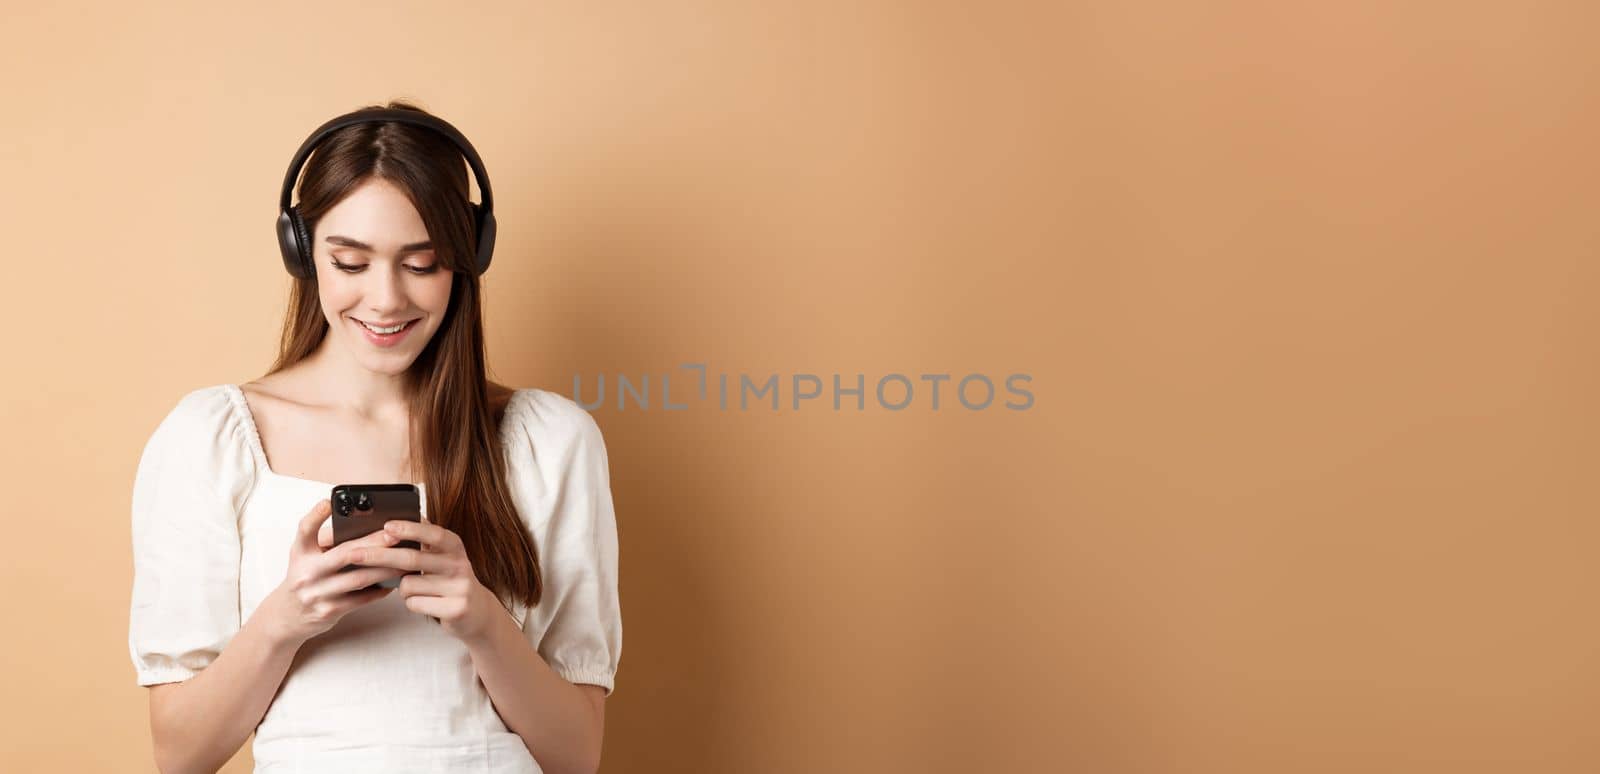 Smiling woman texting message on phone and listening music in wireless headphones, watching video on smartphone, beige background.